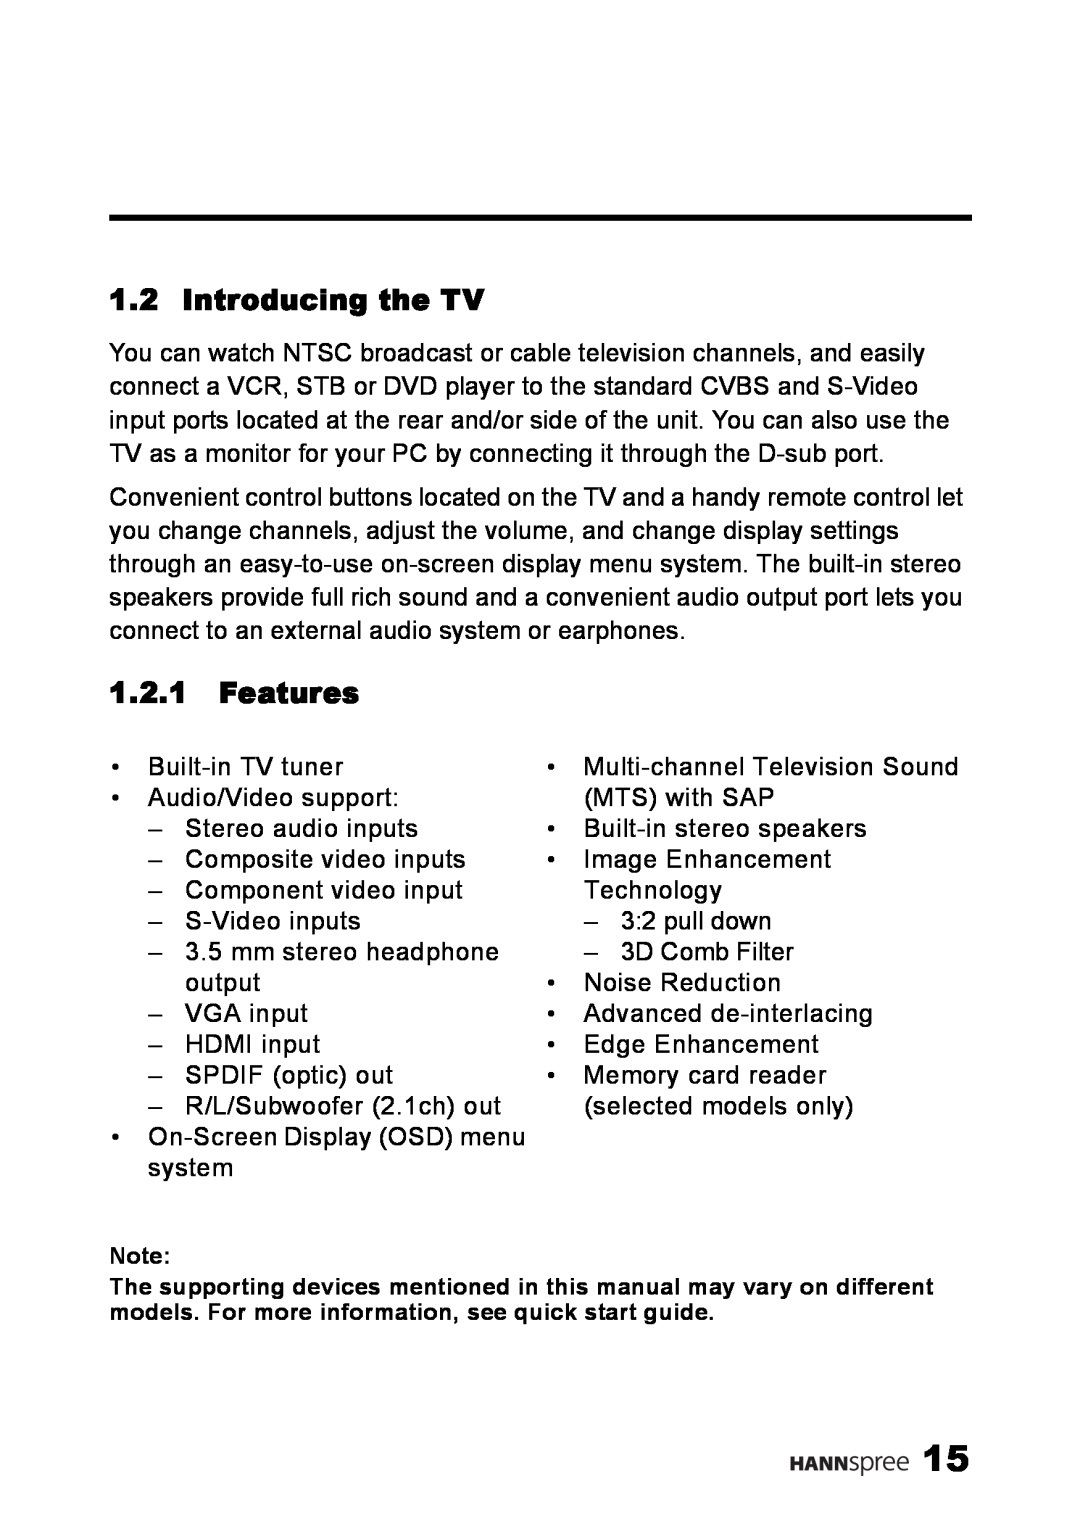 HANNspree MAK-000039 manual Introducing the TV, Features 